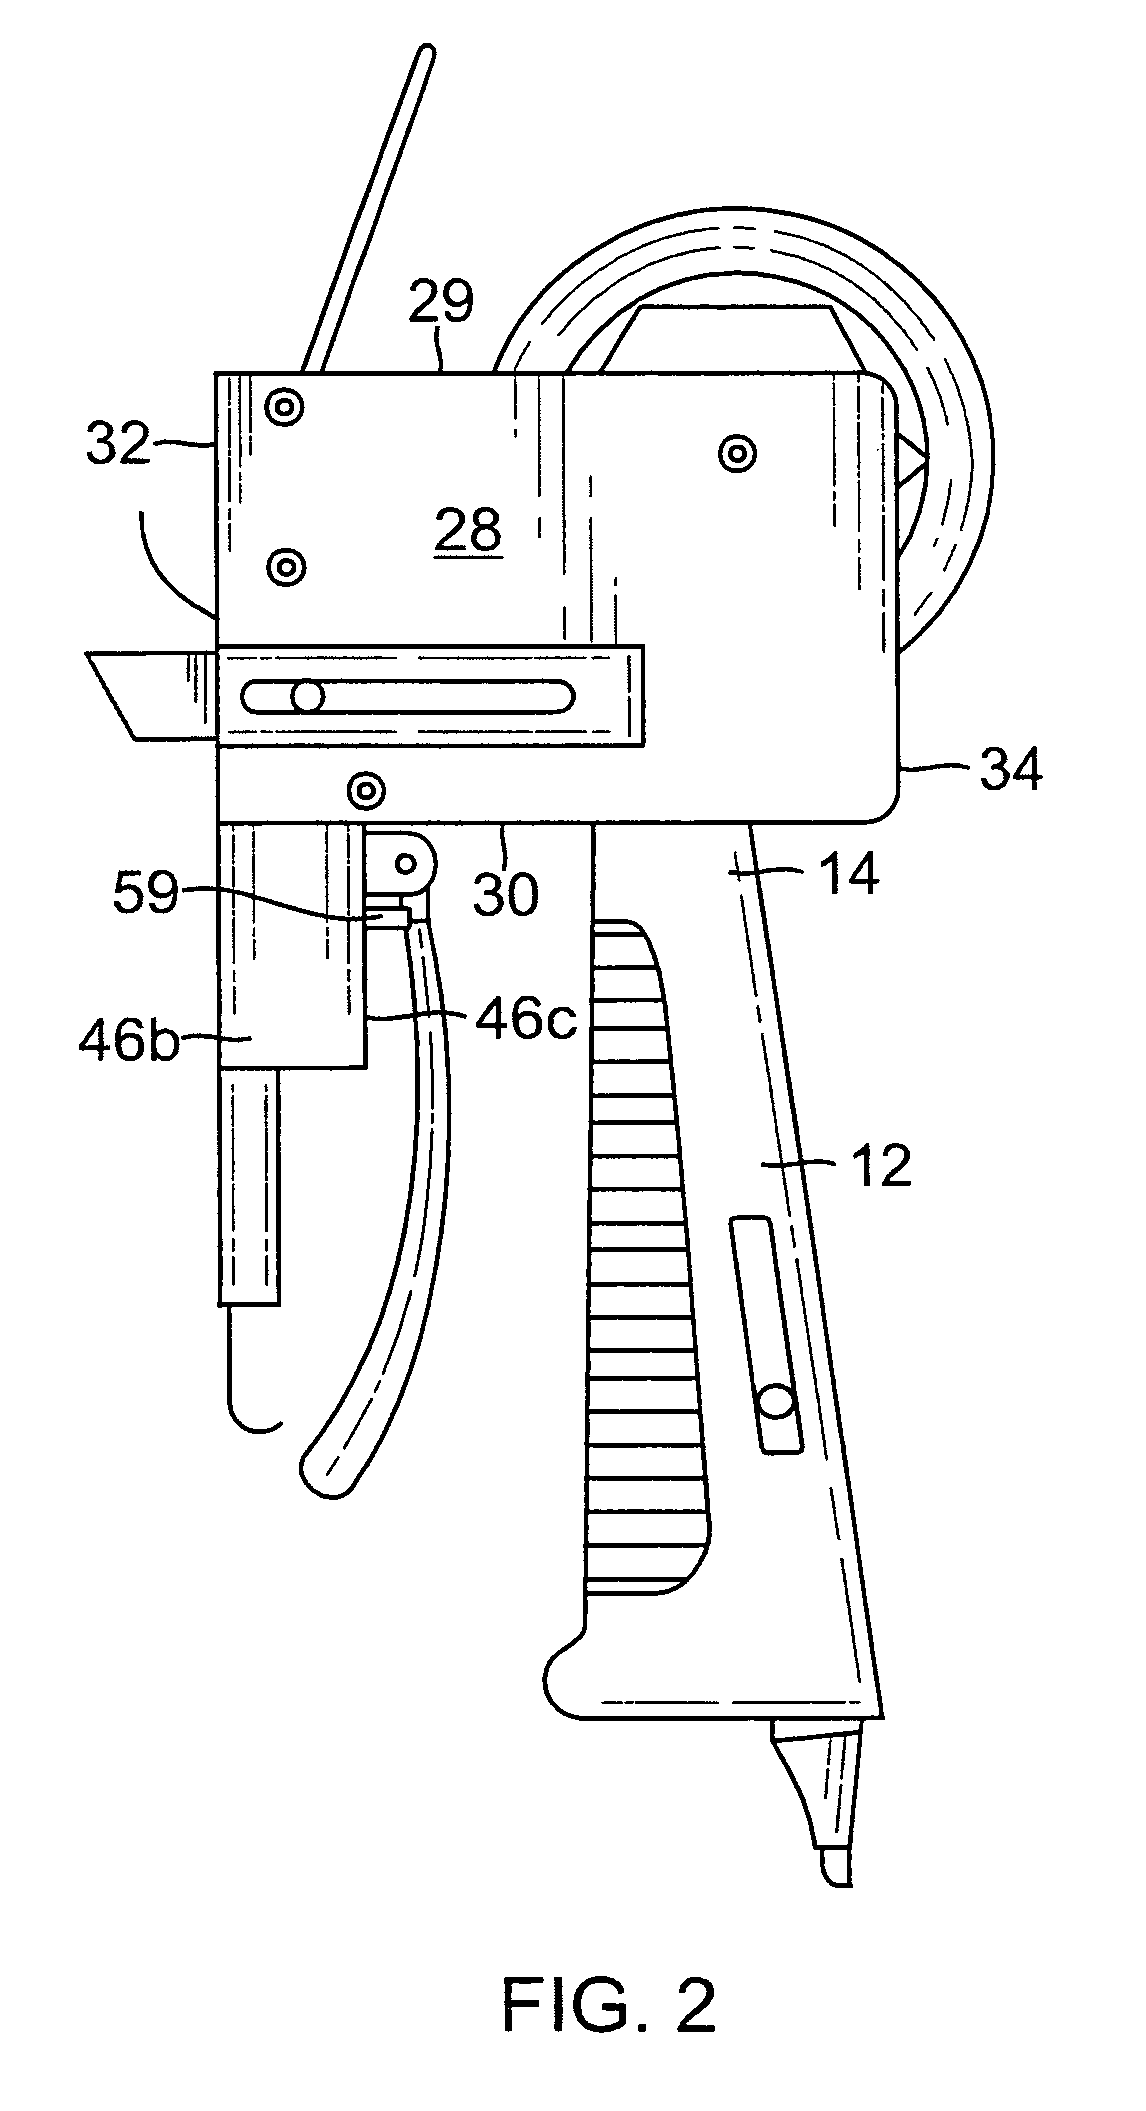 Four-in-one multi-component combination tool to facilitate forming and sealing cartons and boxes